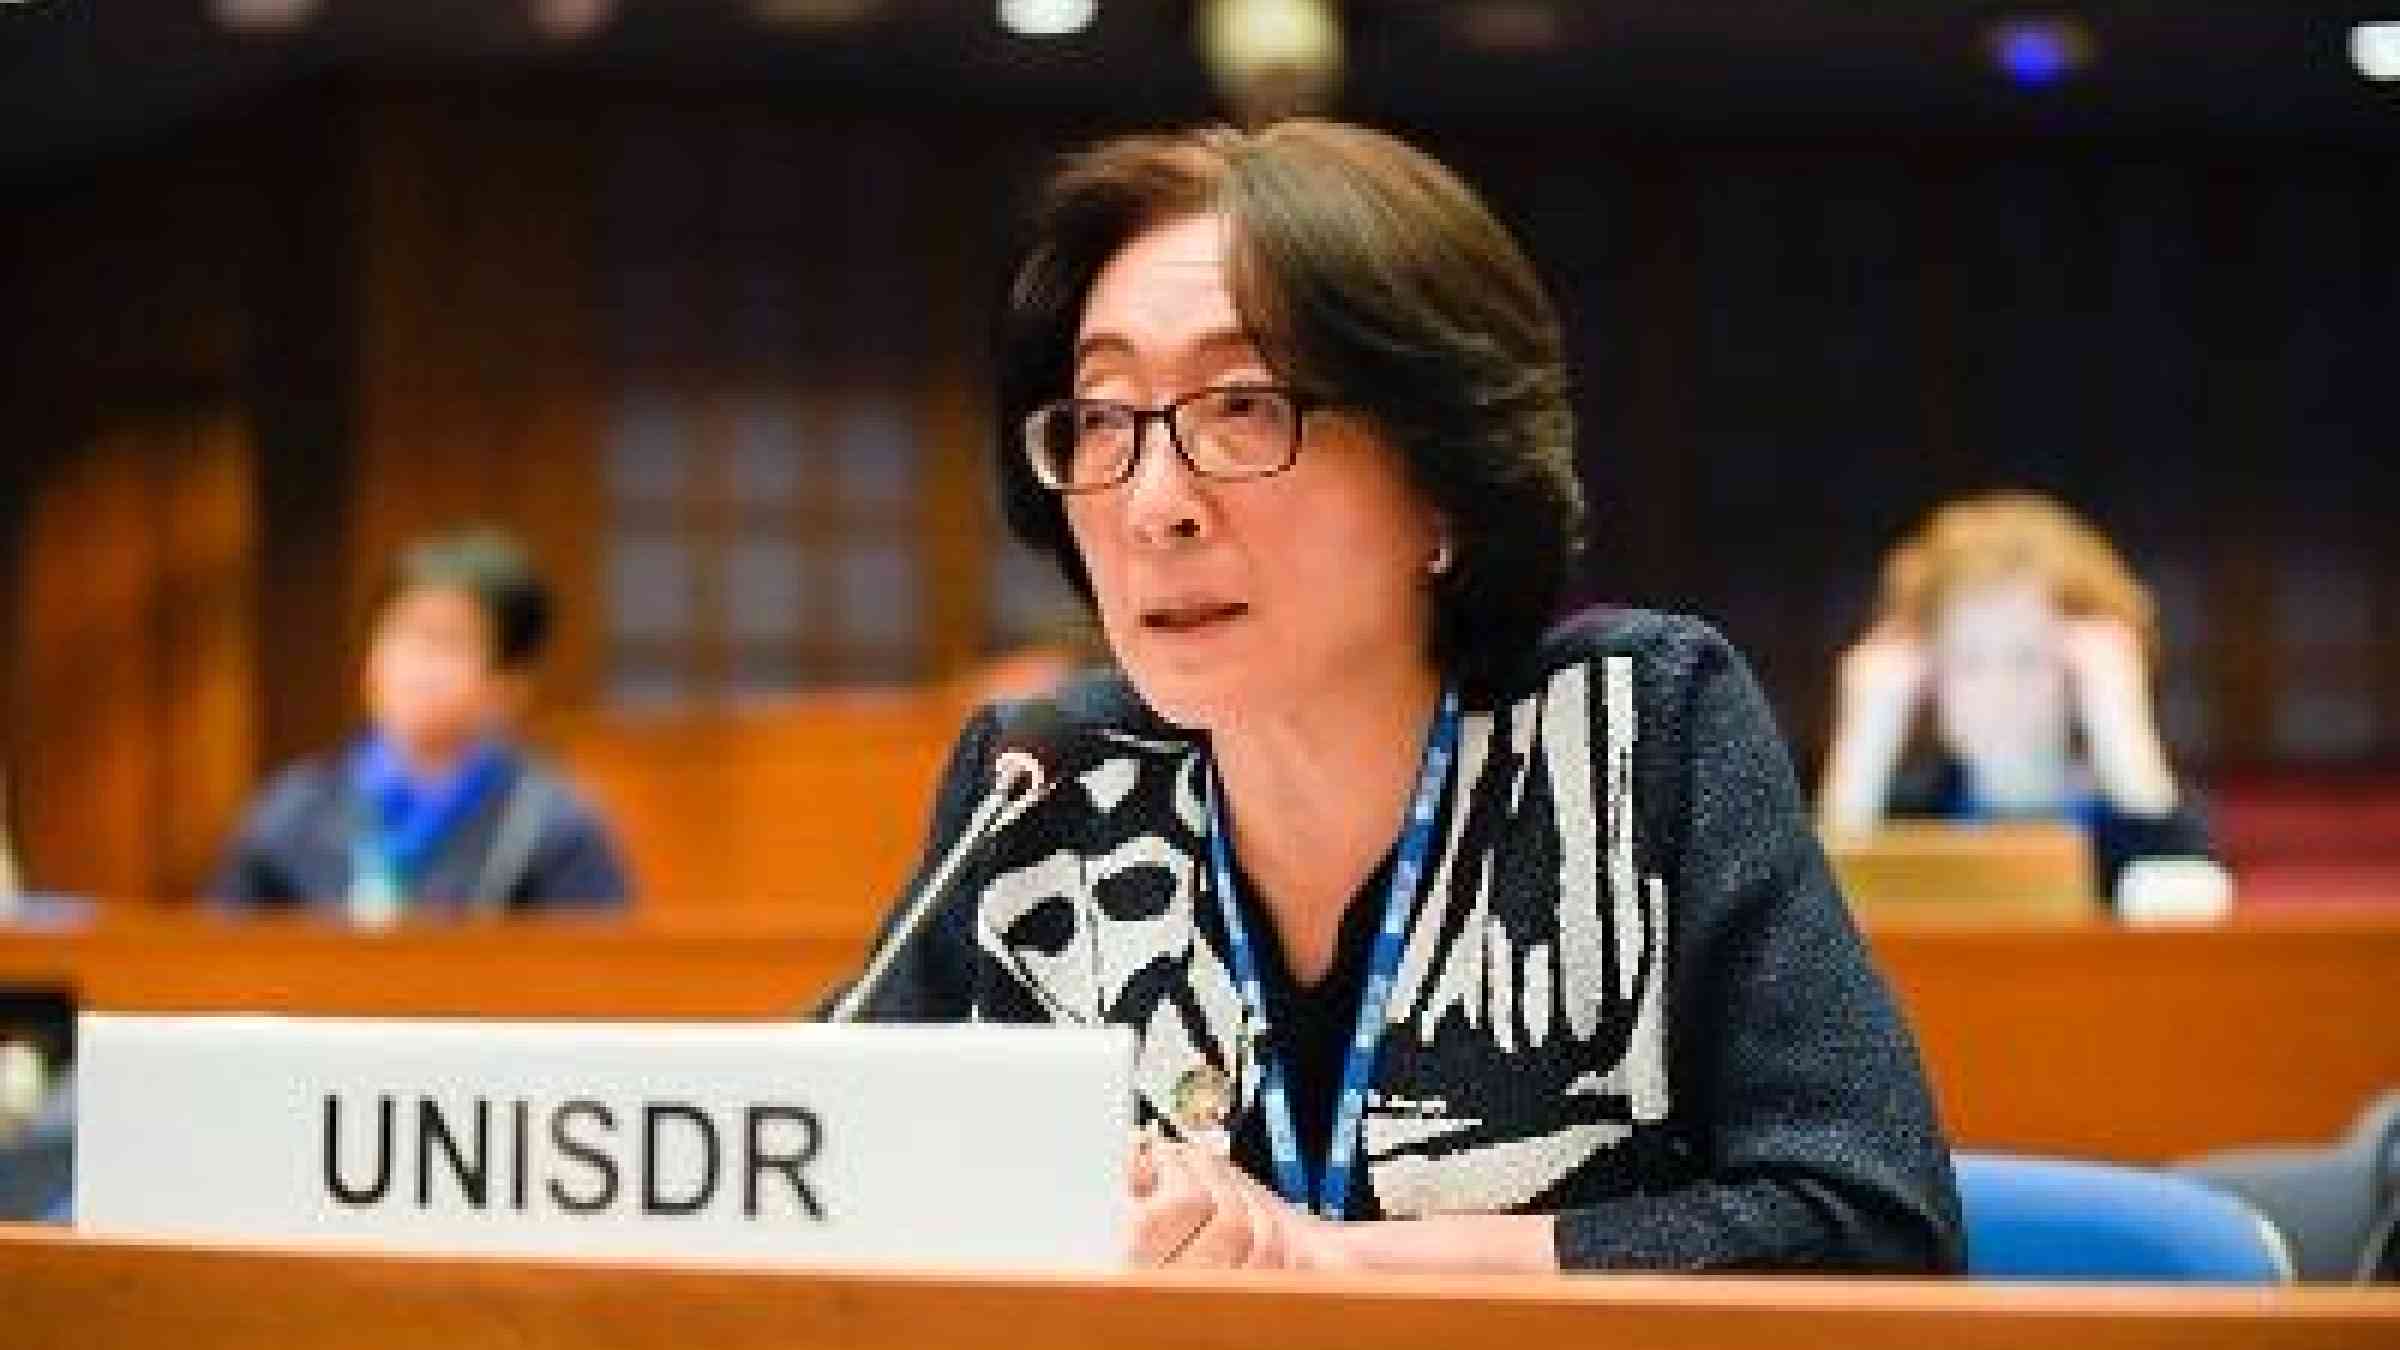 UNISDR head, Mami Mizutori, speaking at this week's 74th UN Economic and Social Commission for Asia and the Pacific (ESCAP)